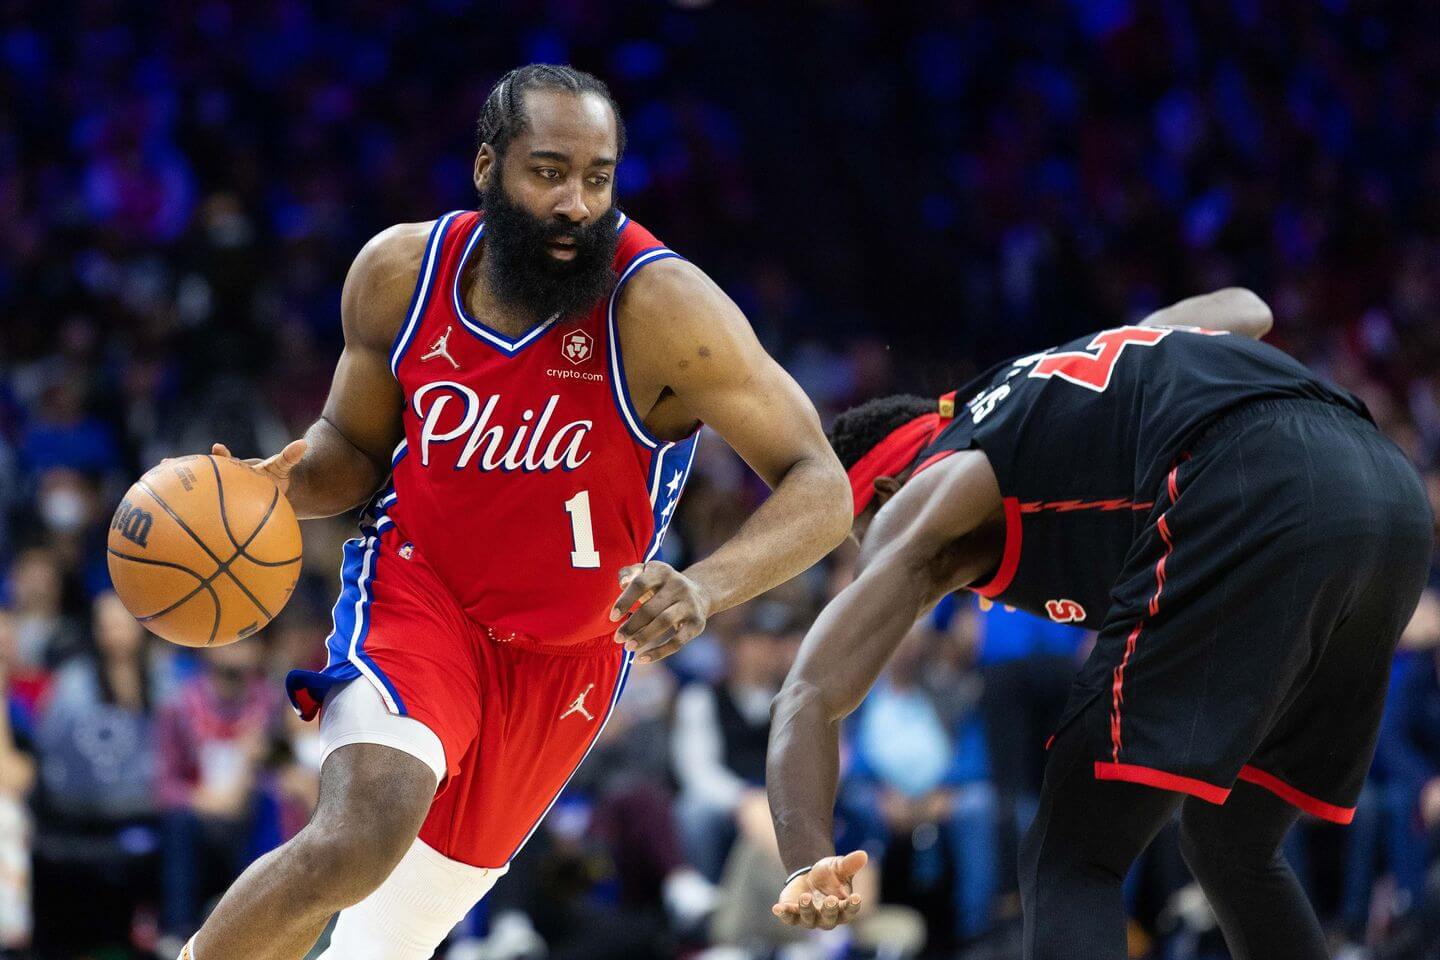 James Harden will opt out, re-sign with Philadelphia 76ers on free-agent deal: Sources